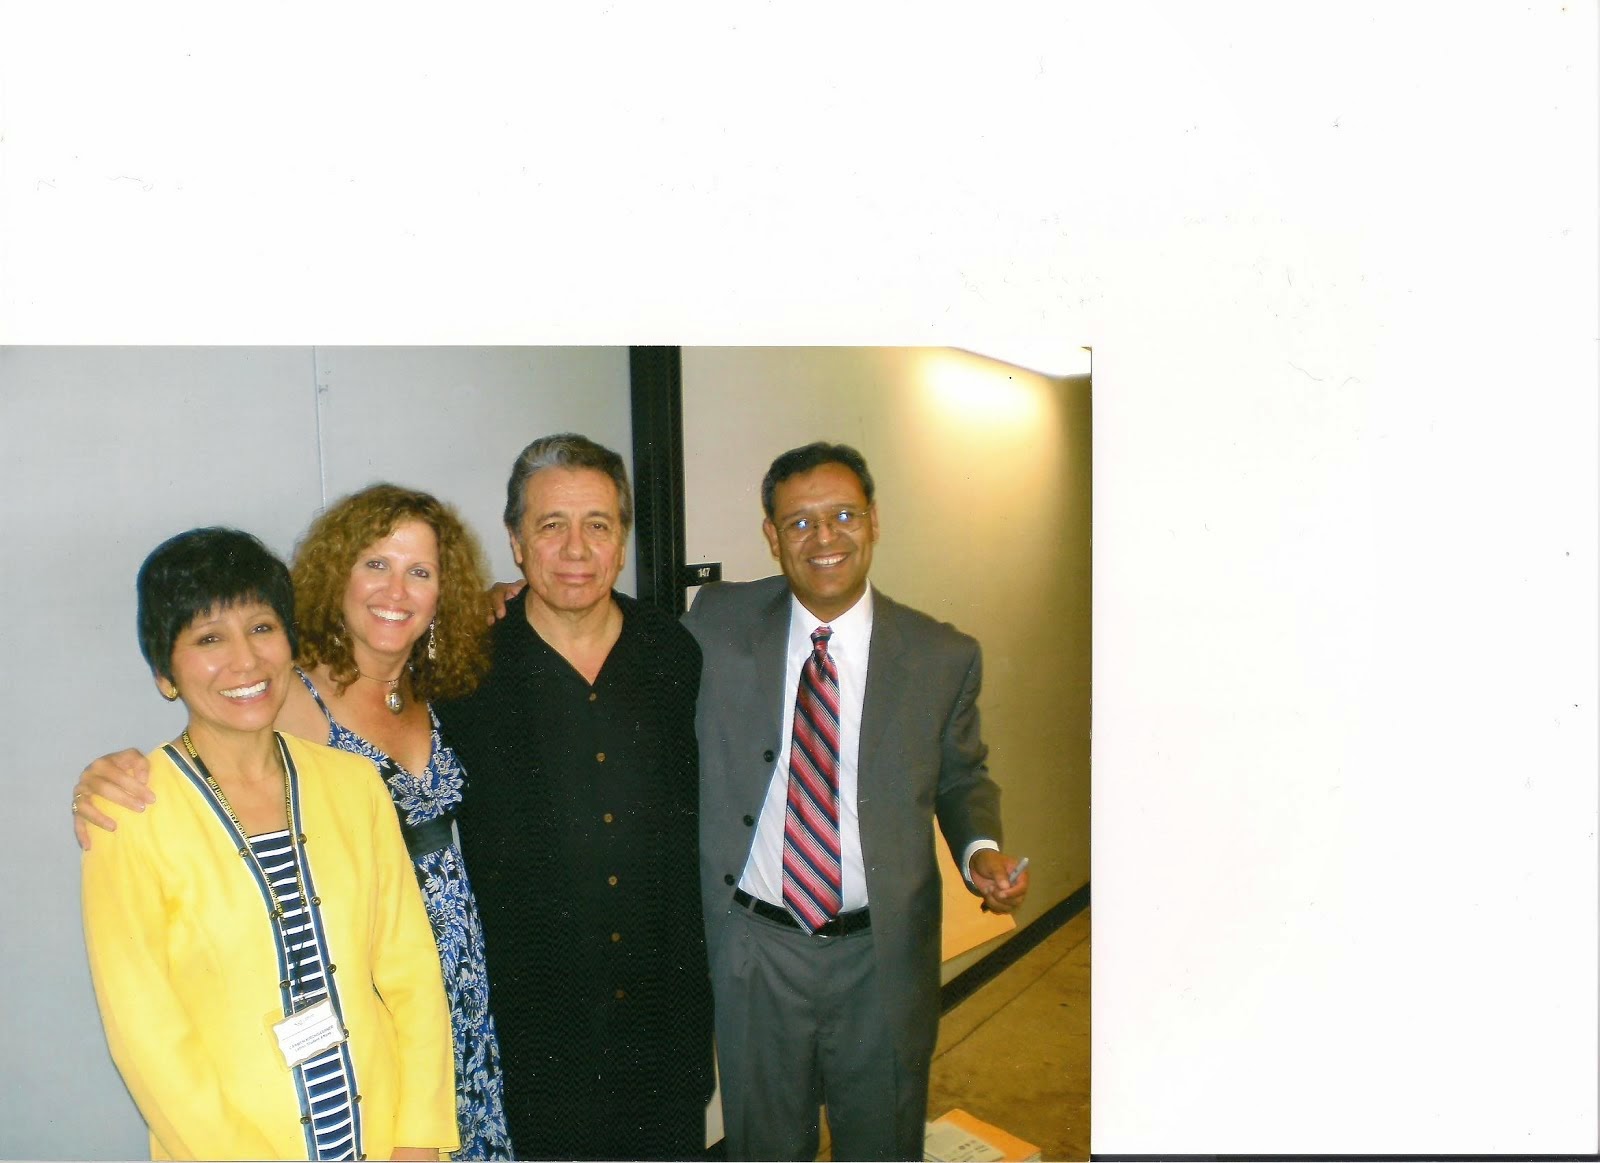 Mom (wearing yellow) and friends with Edward James Olmos